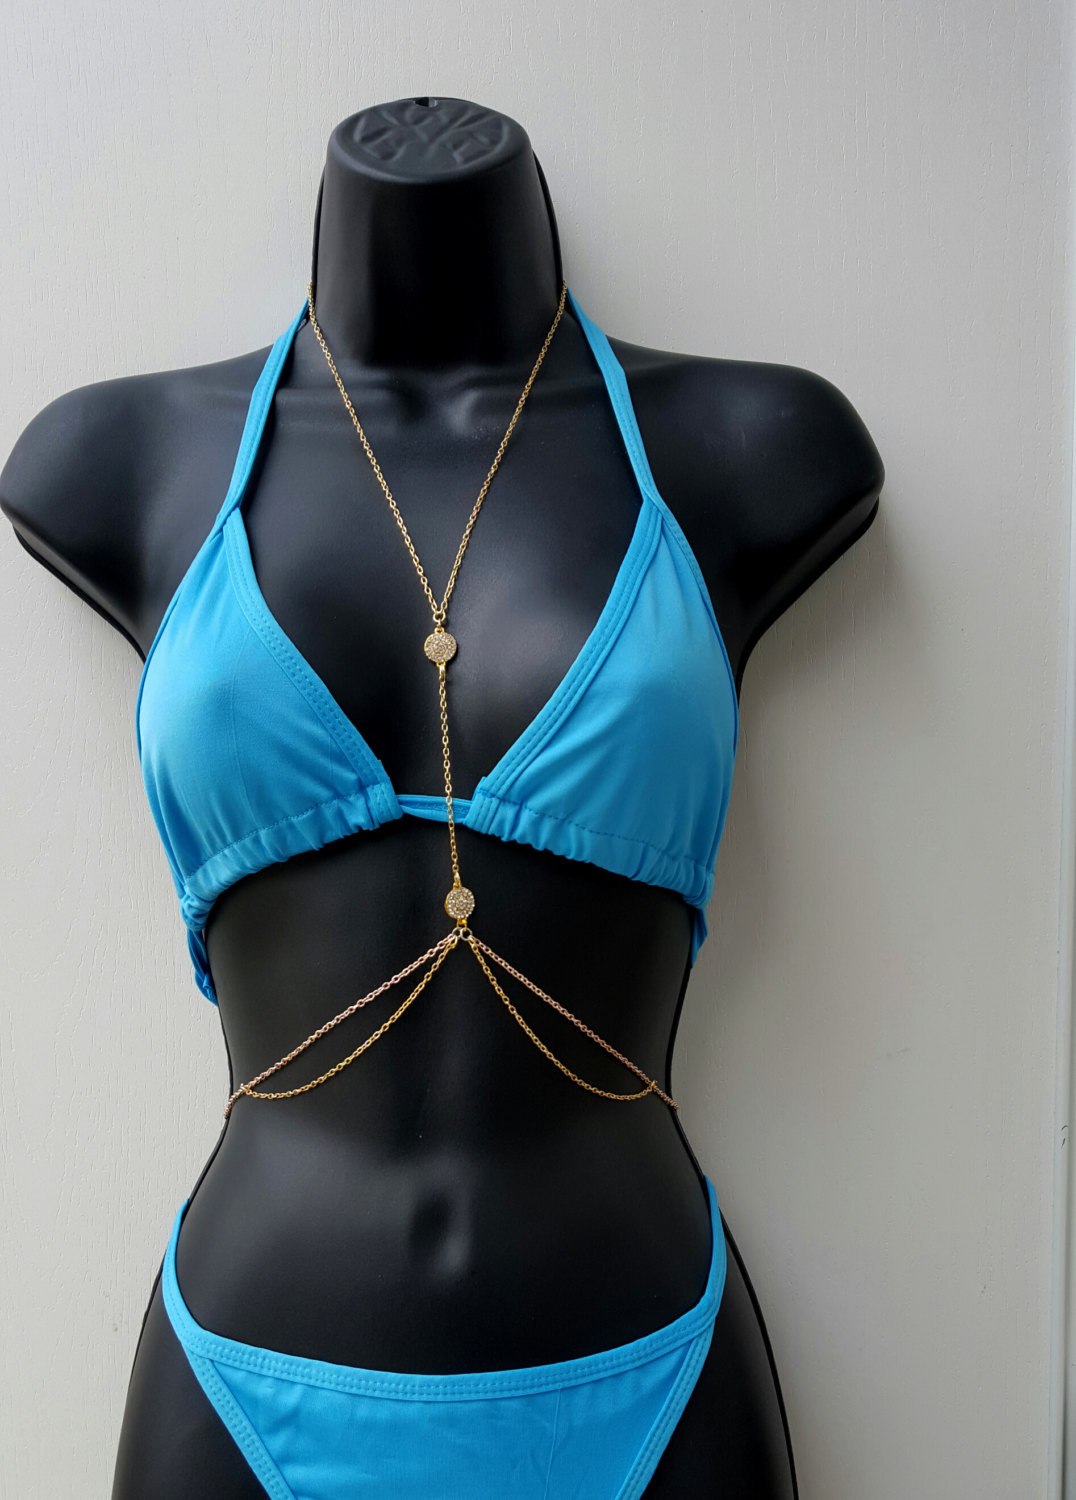 Body Jewelry Bathing Suit
 Gold Belly Chain Body Chain Body Jewelry Harness Swim Suit